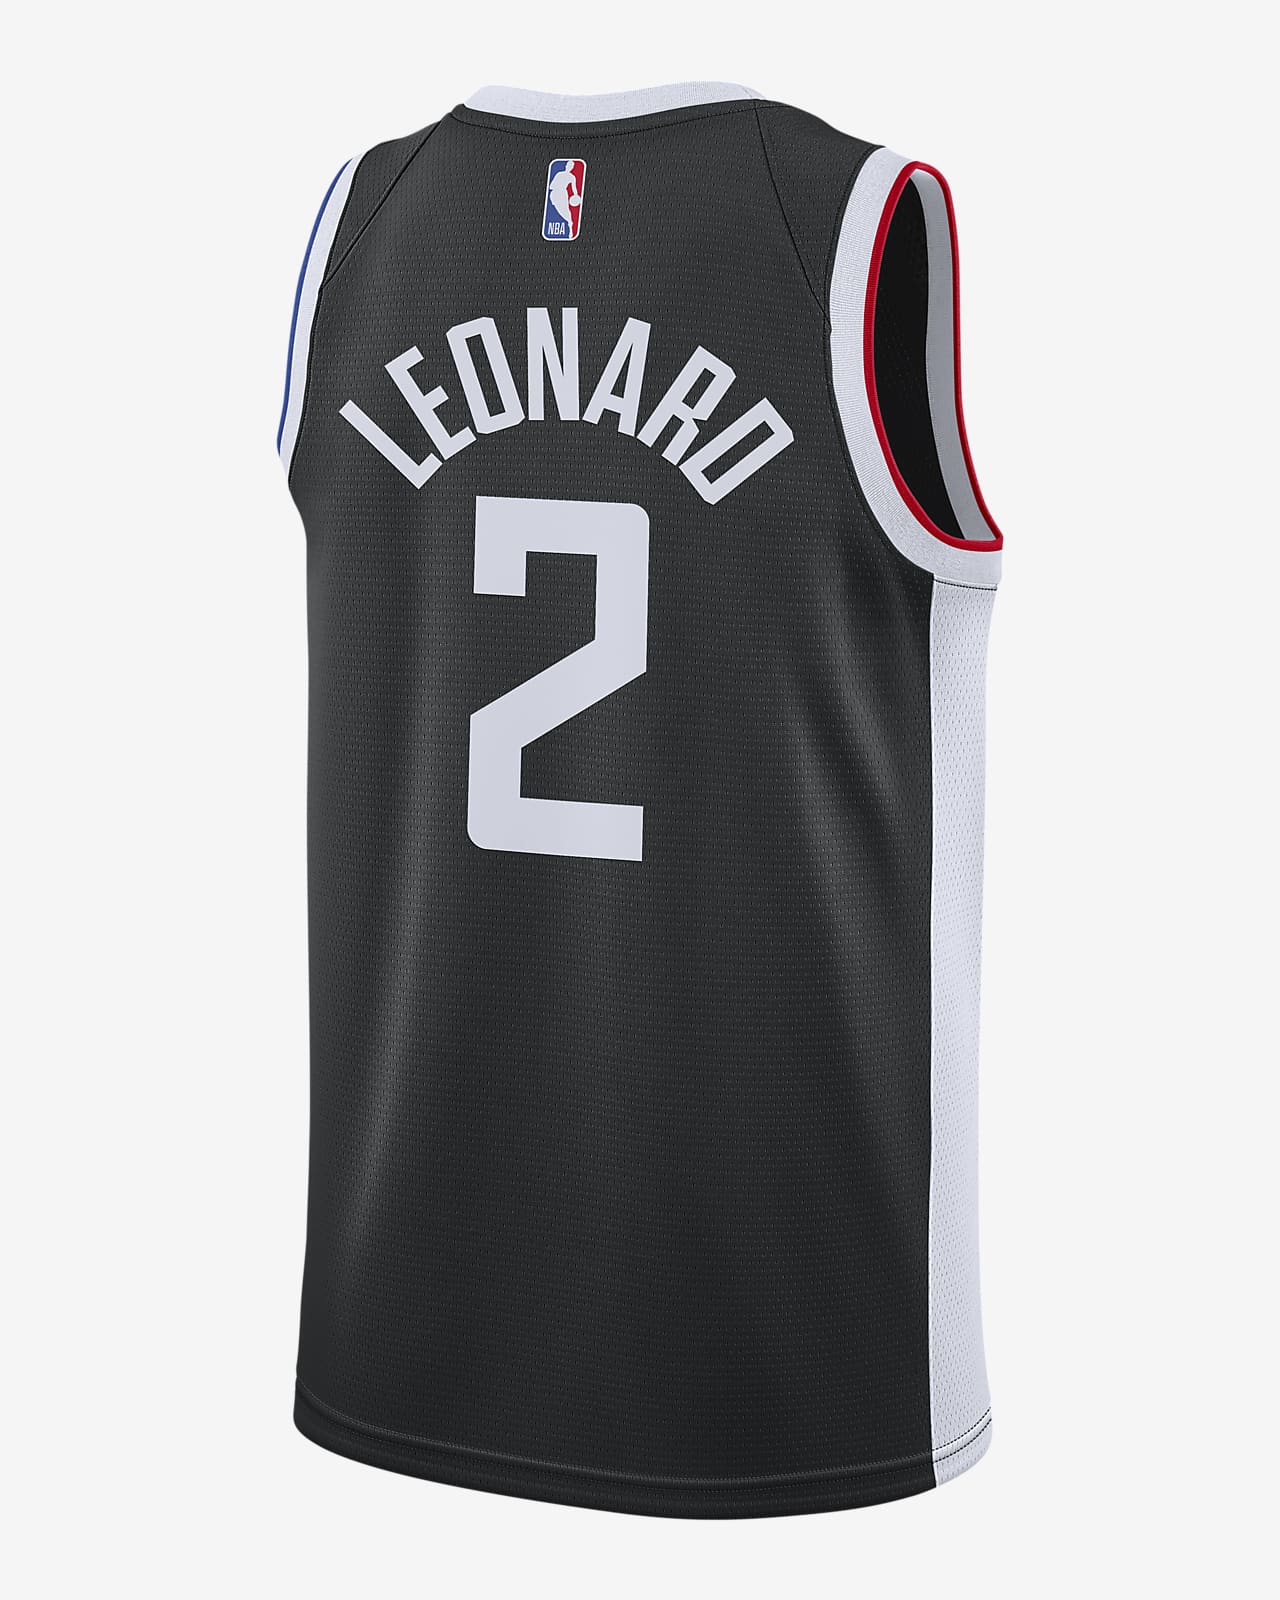 clippers third jersey